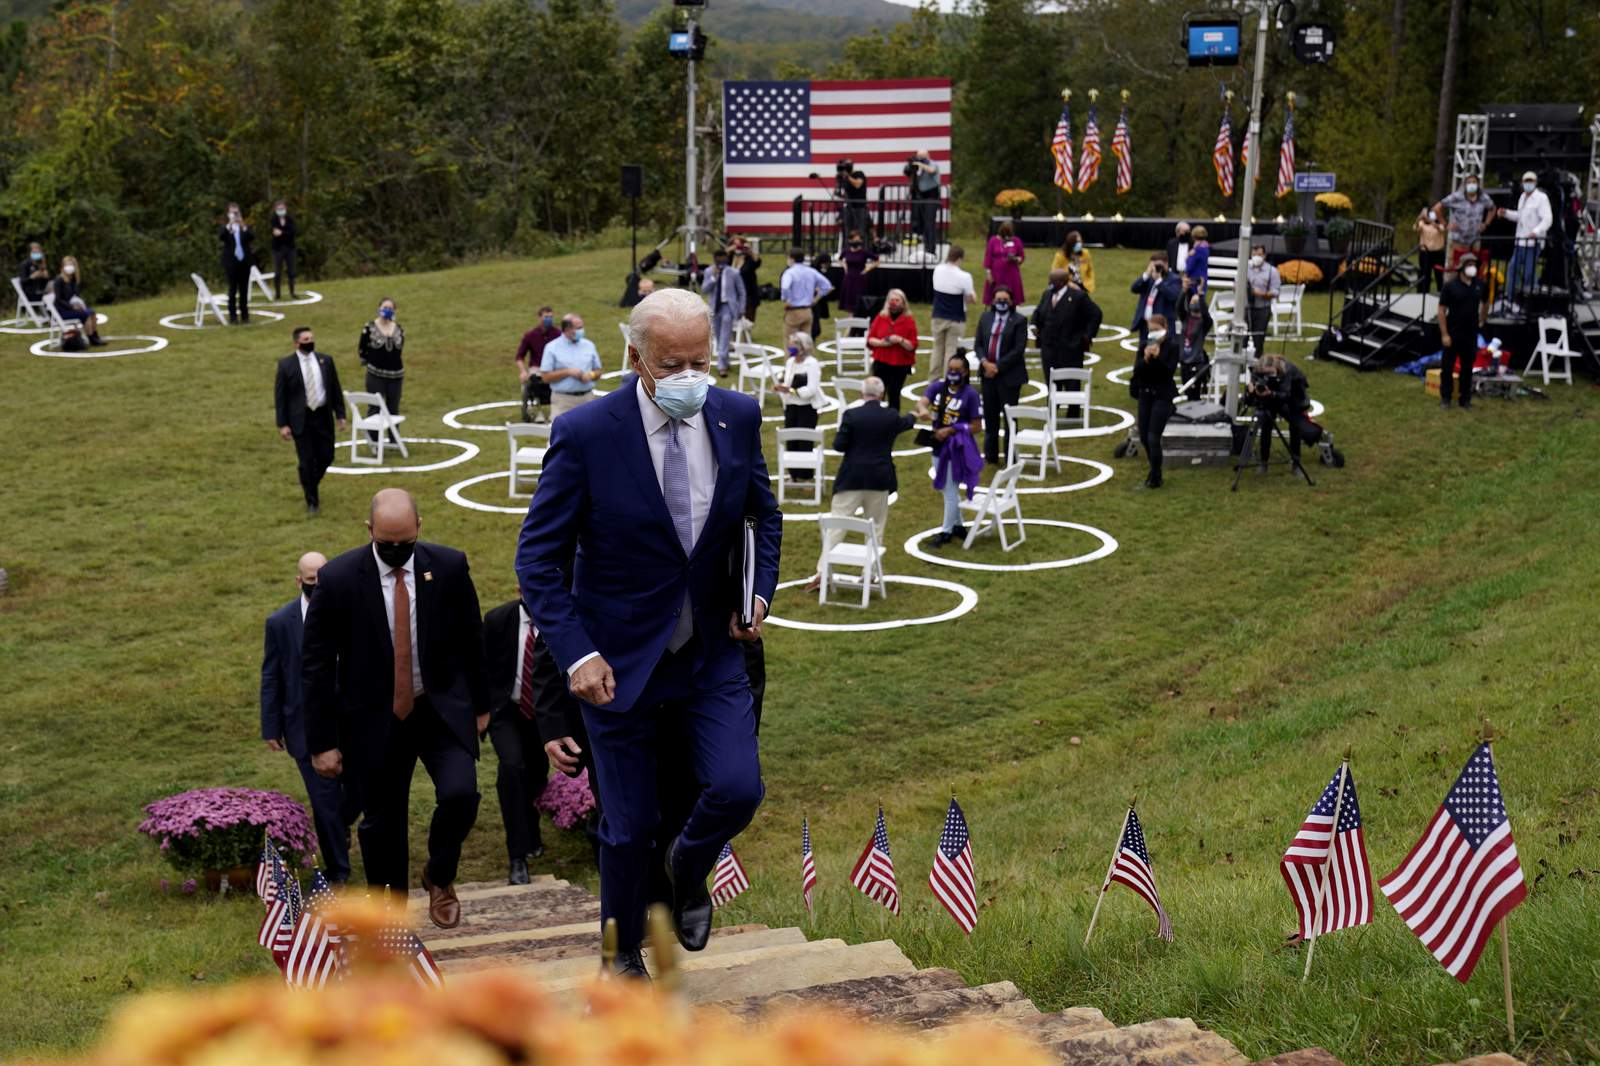 Biden vows to unify and save country; Trump hits Midwest